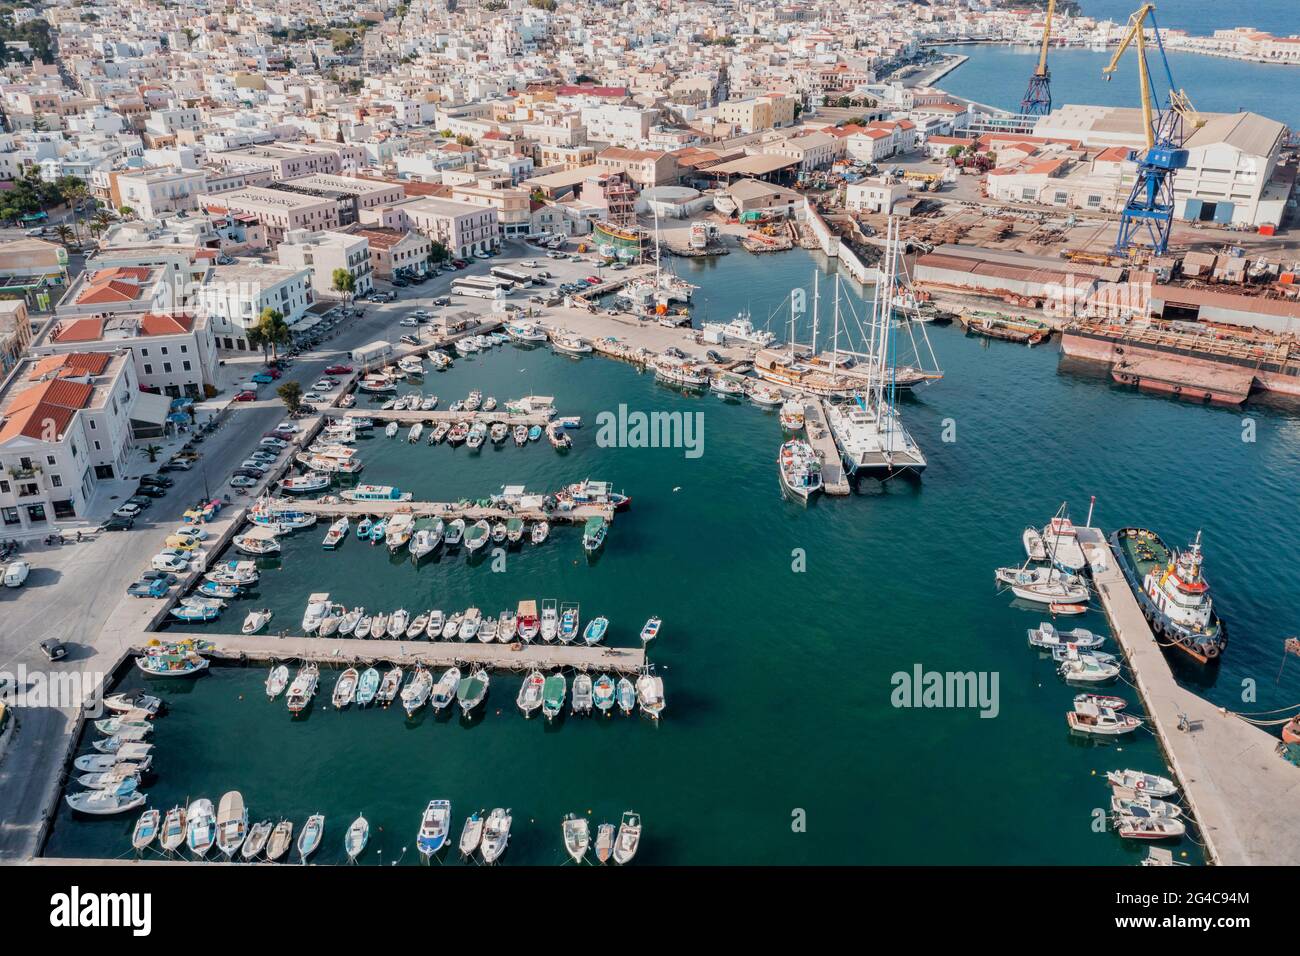 Syros island, Greece, Ermoupolis town and harbor aerial drone view. Boats moored at yachts marina dock. Industrial plant Neorion shipyard and cityscap Stock Photo